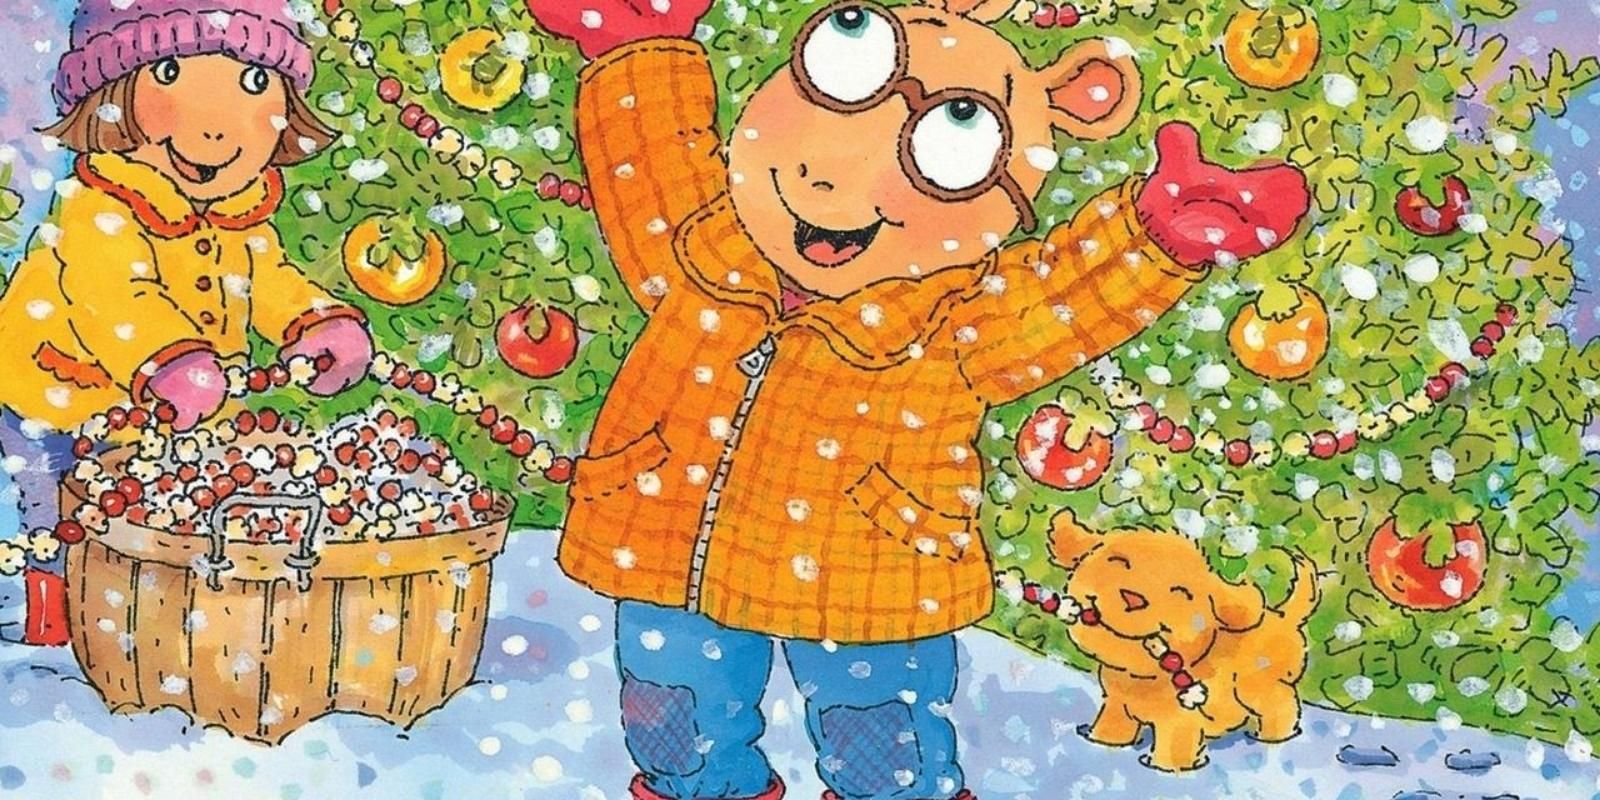 Arthur Read, DW Read, and Pal play in the snow in Arthur's Perfect Christmas